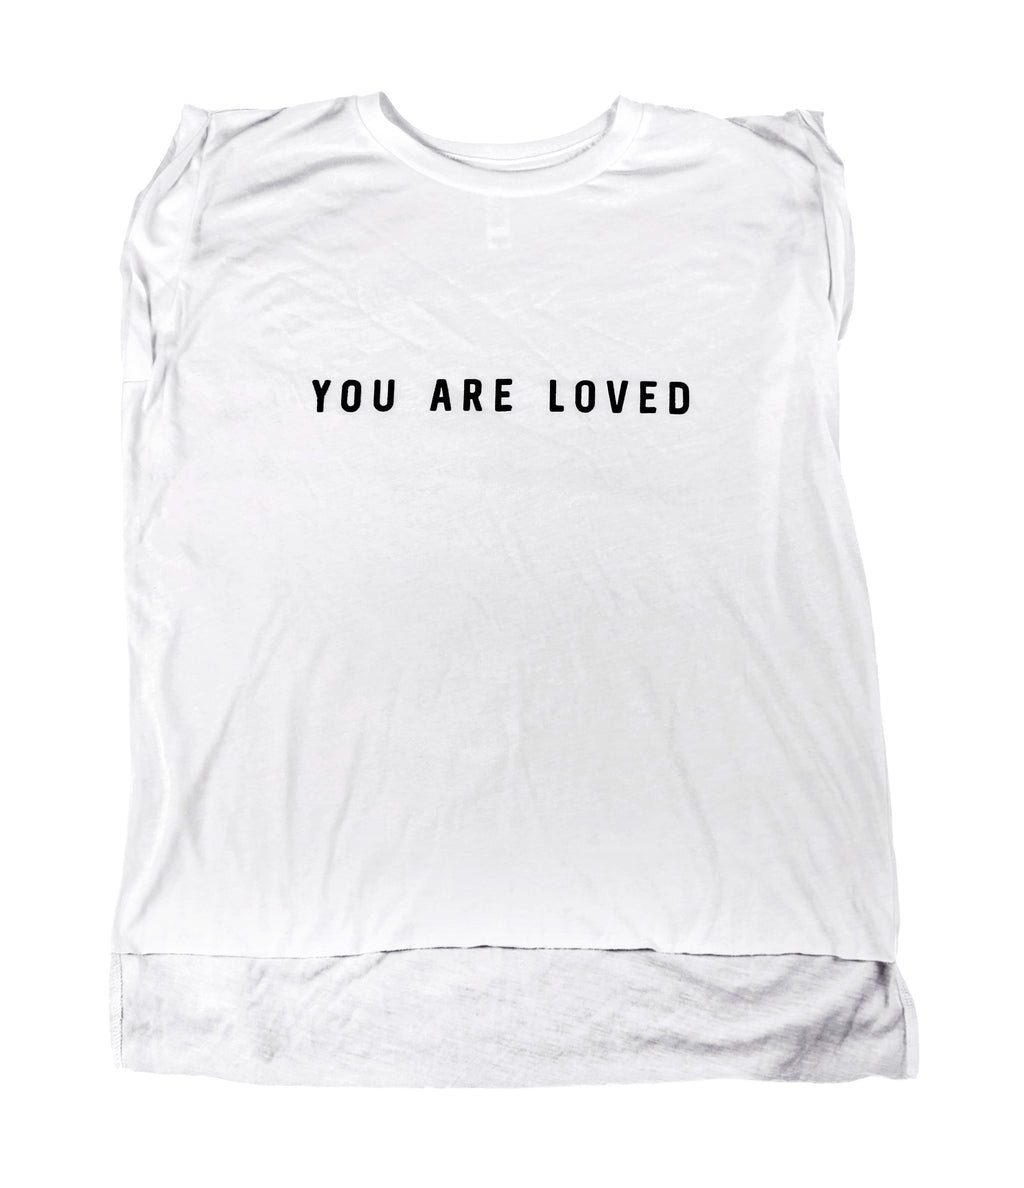 YOU ARE LOVED WHITE WOMEN'S ROLLED CUFF MUSCLE T-SHIRT